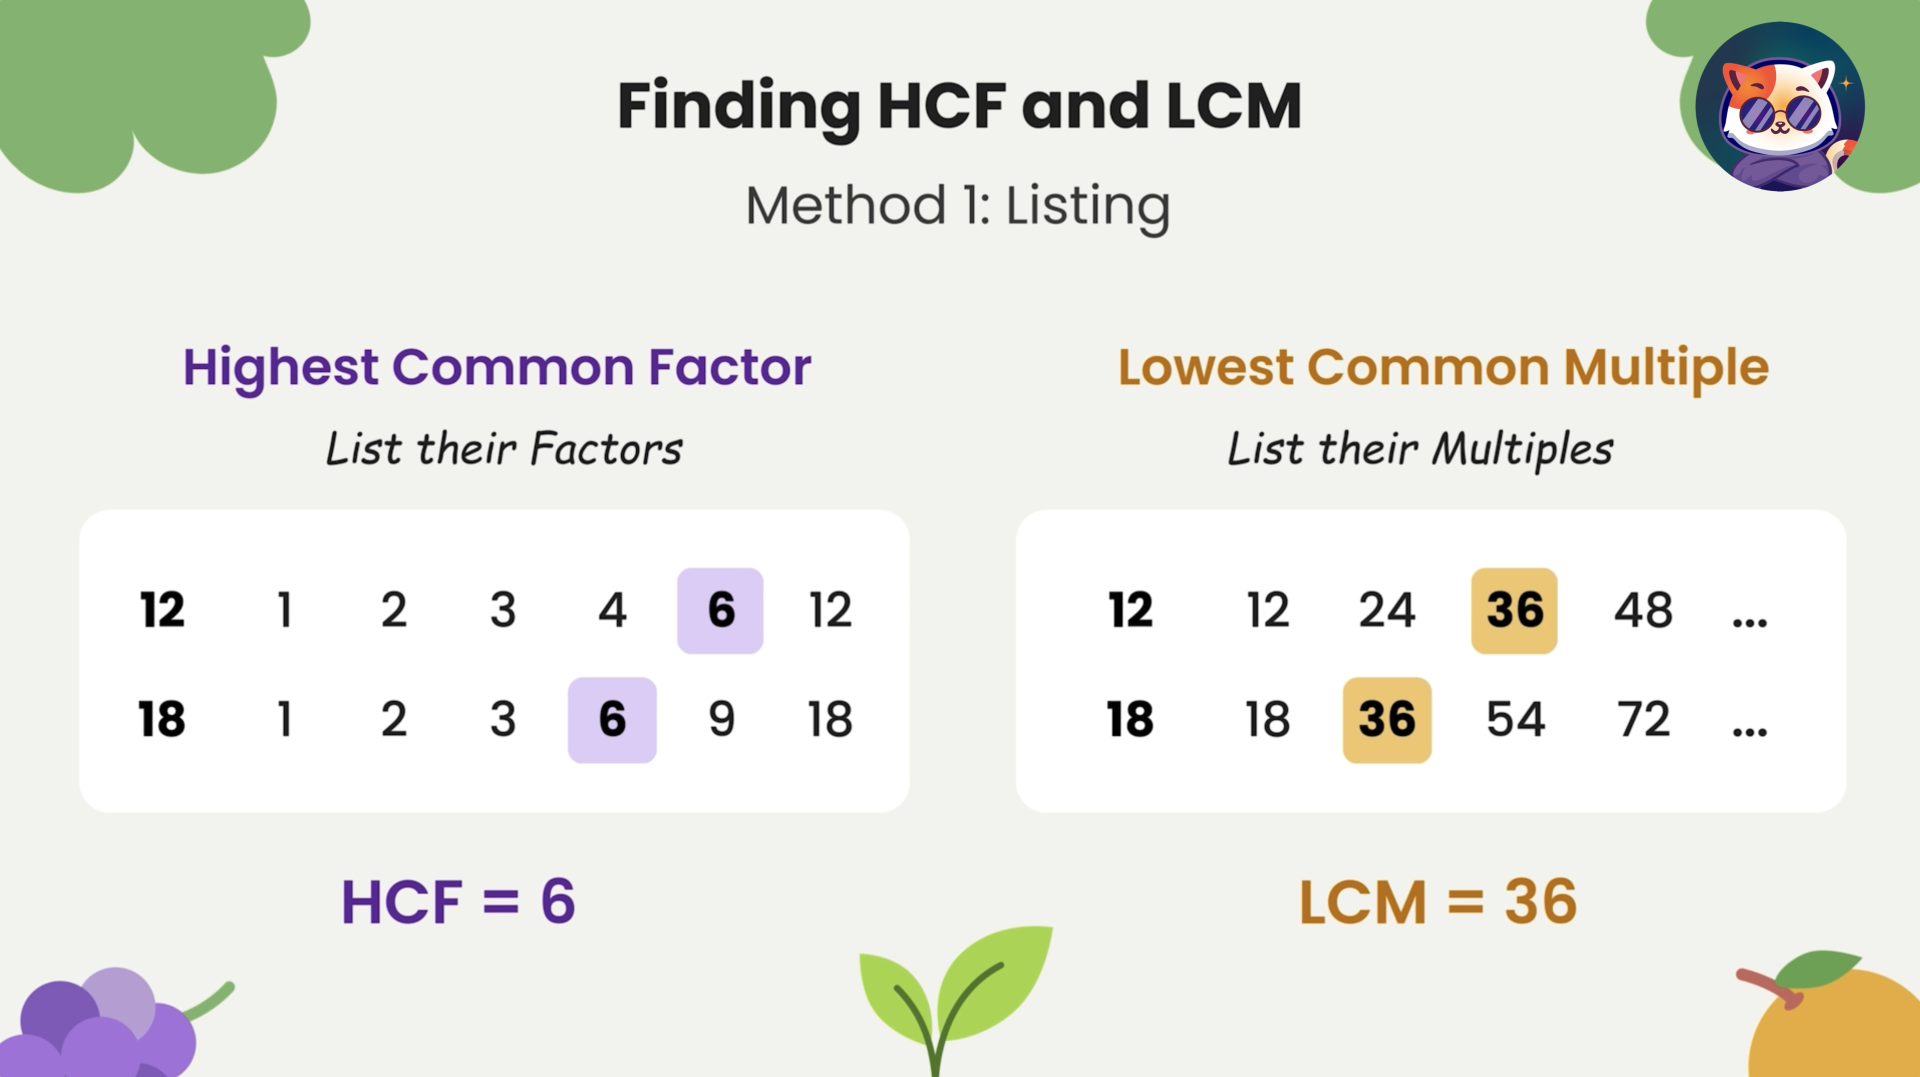 GCSE Maths guide on finding HCF by listing factors and LCM by listing multiples.